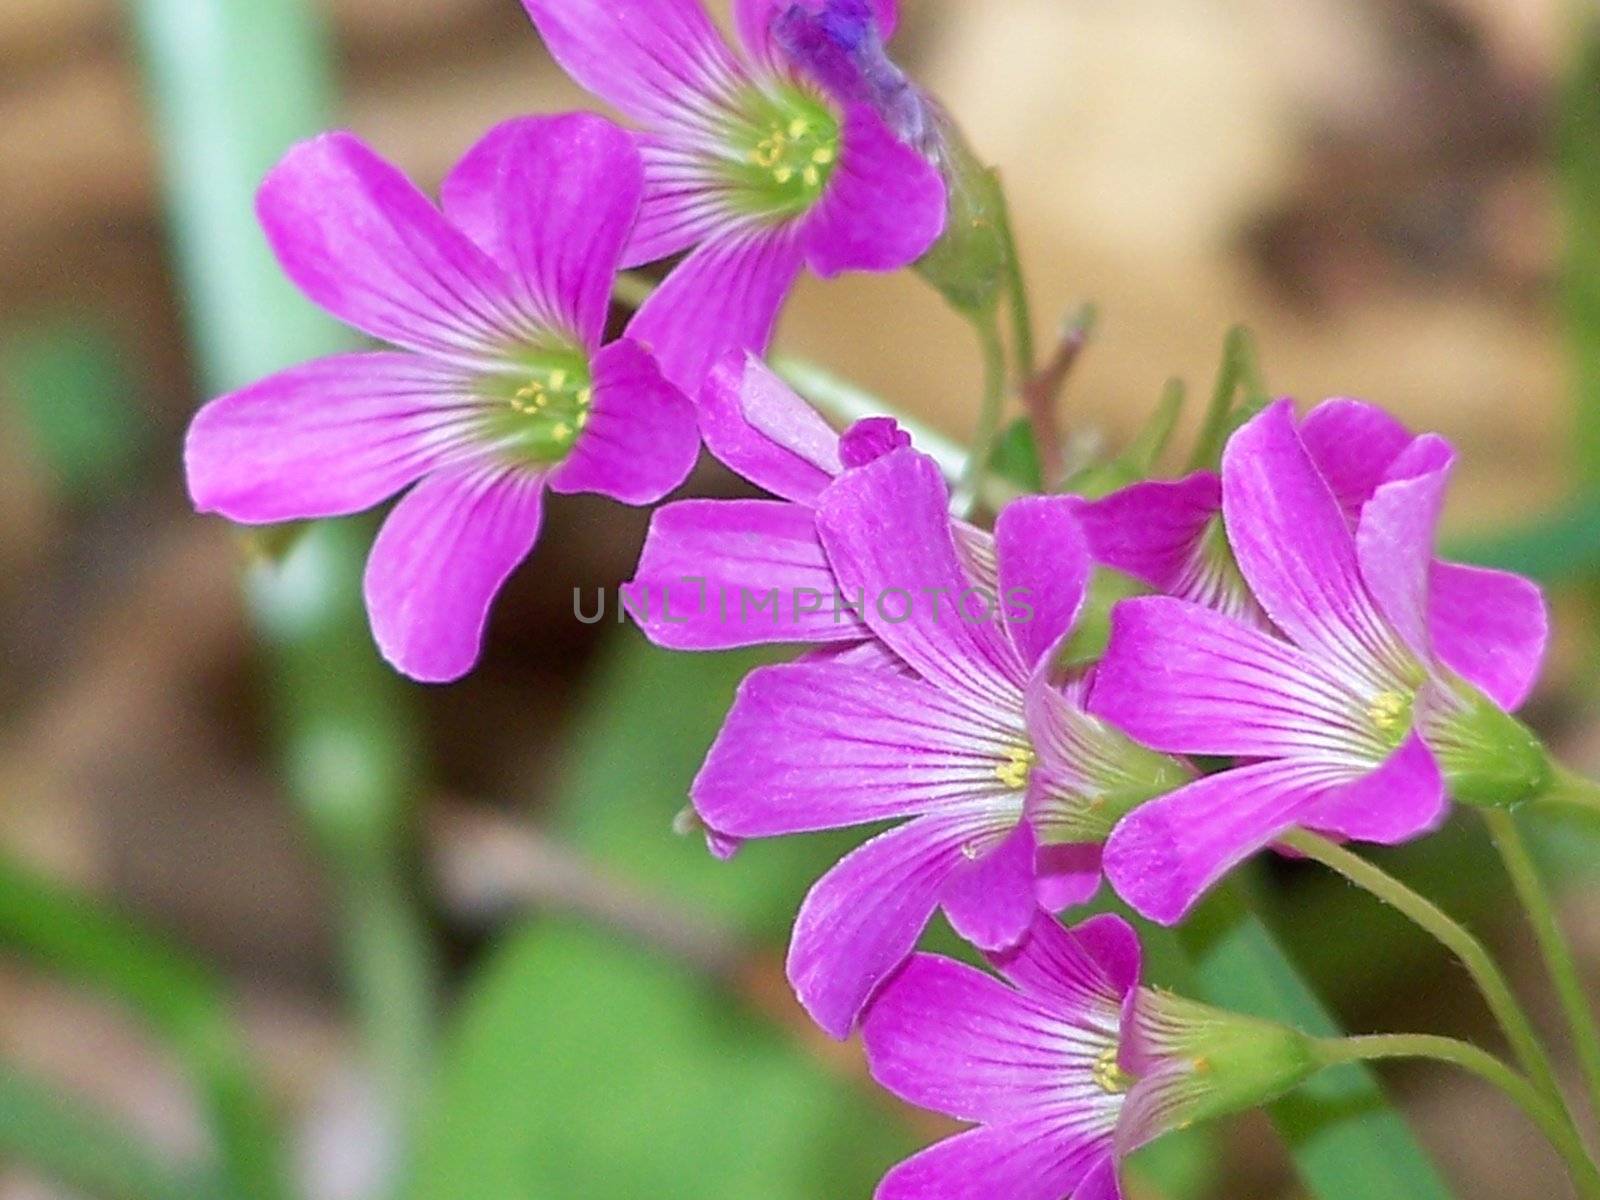 These beautiful wildflowers are smaller than a dime.